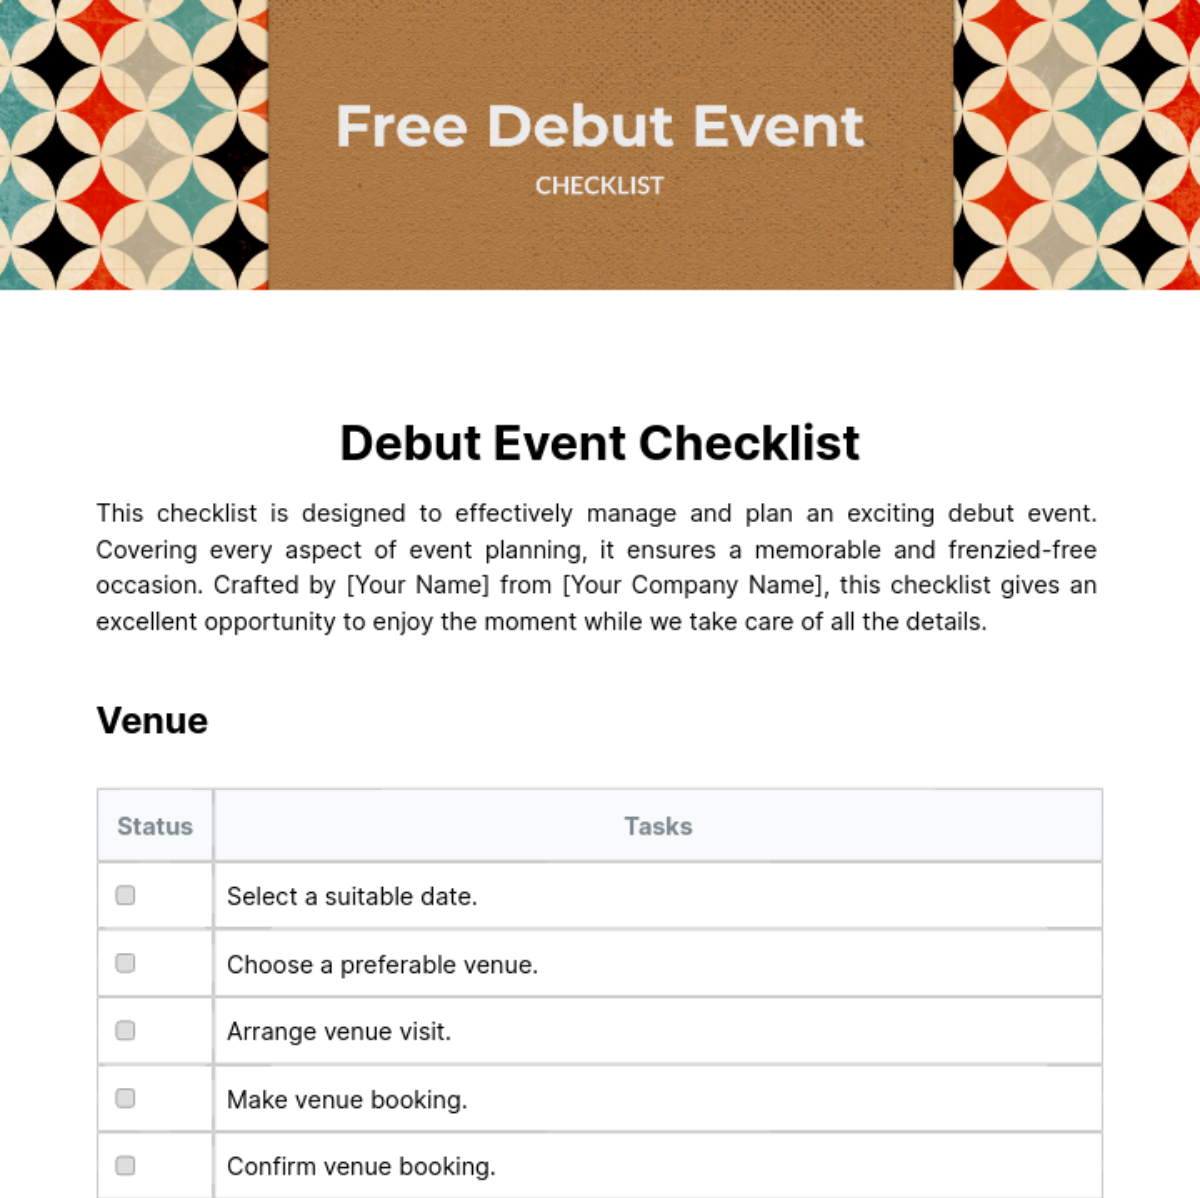 Free Debut Event Checklist Template